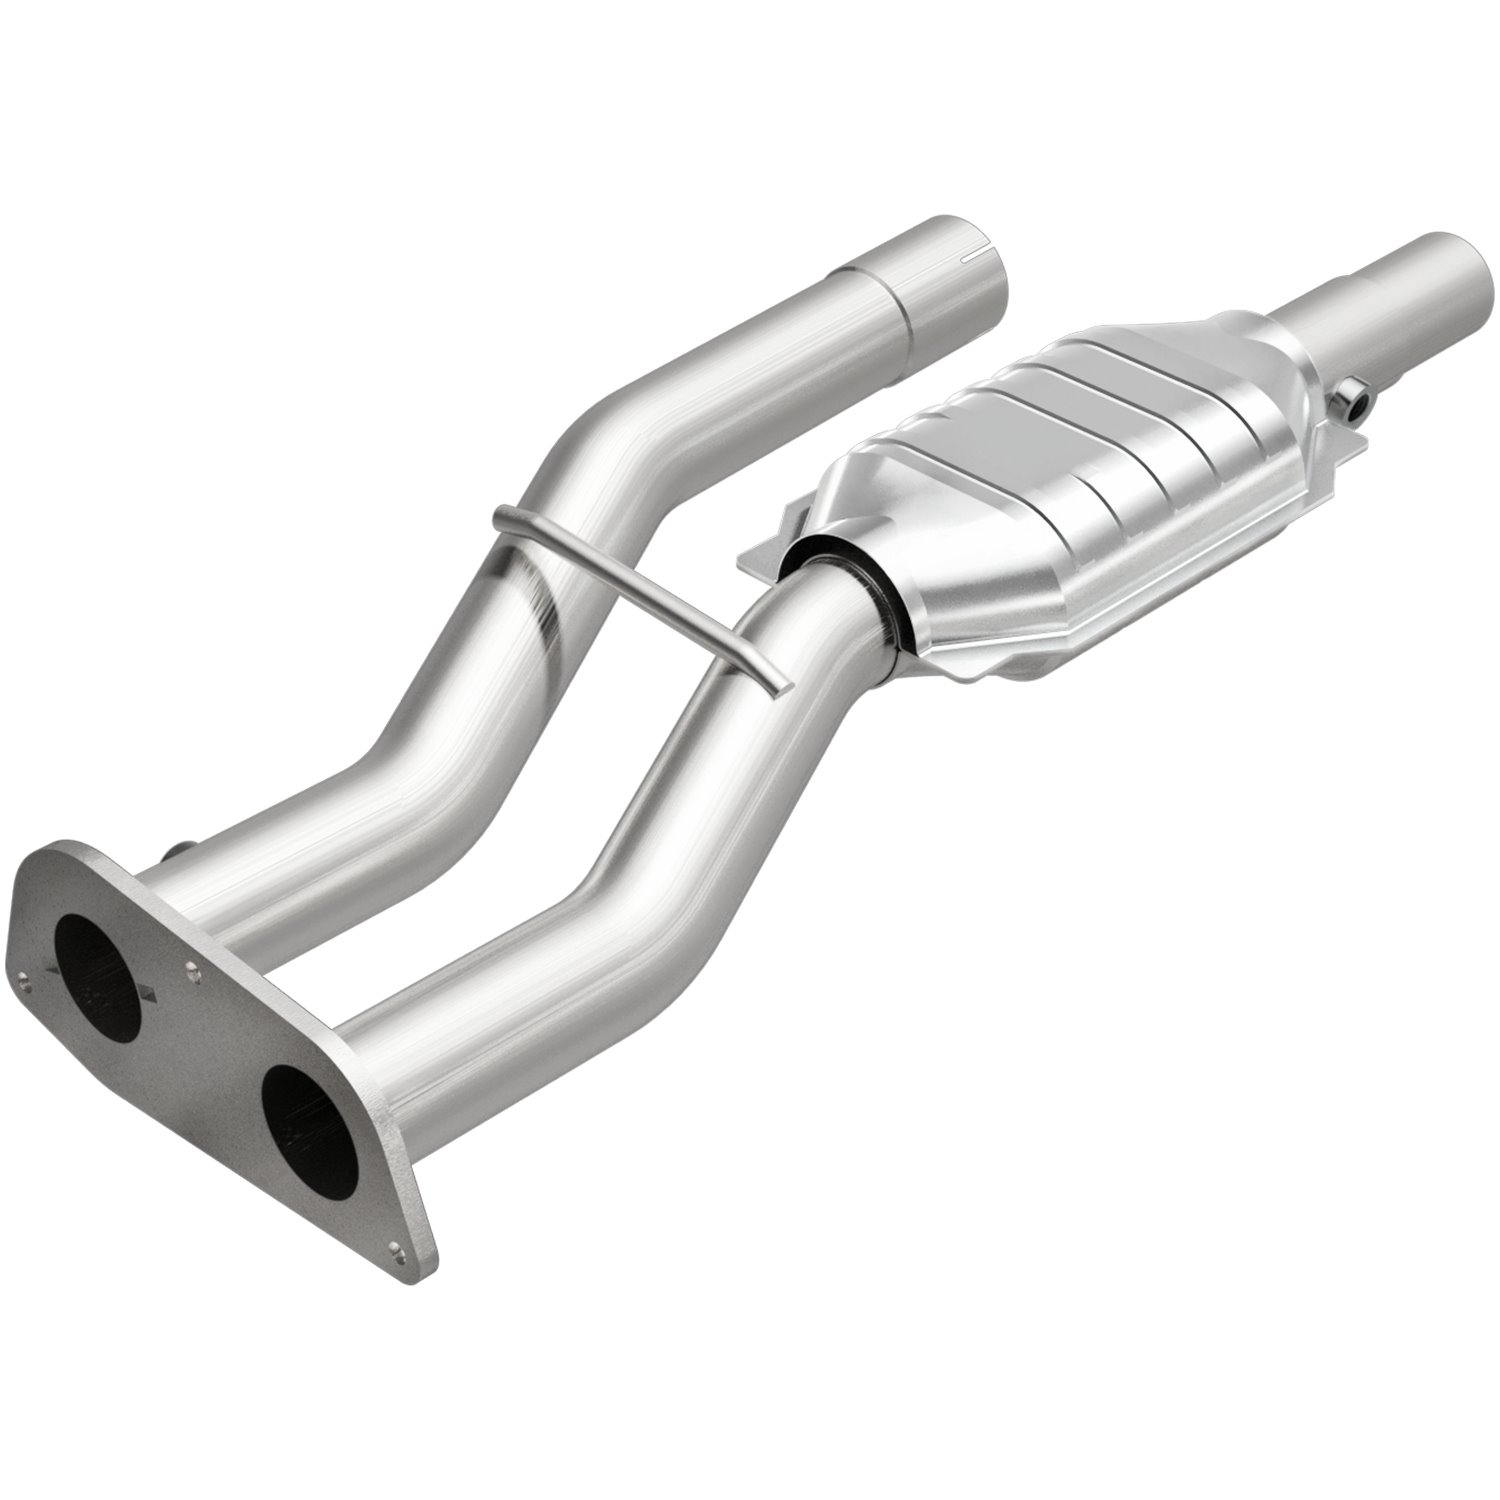 Direct-Fit Catalytic Converter 1996-2000 Chevy/GMC Trucks 5.7/7.4L